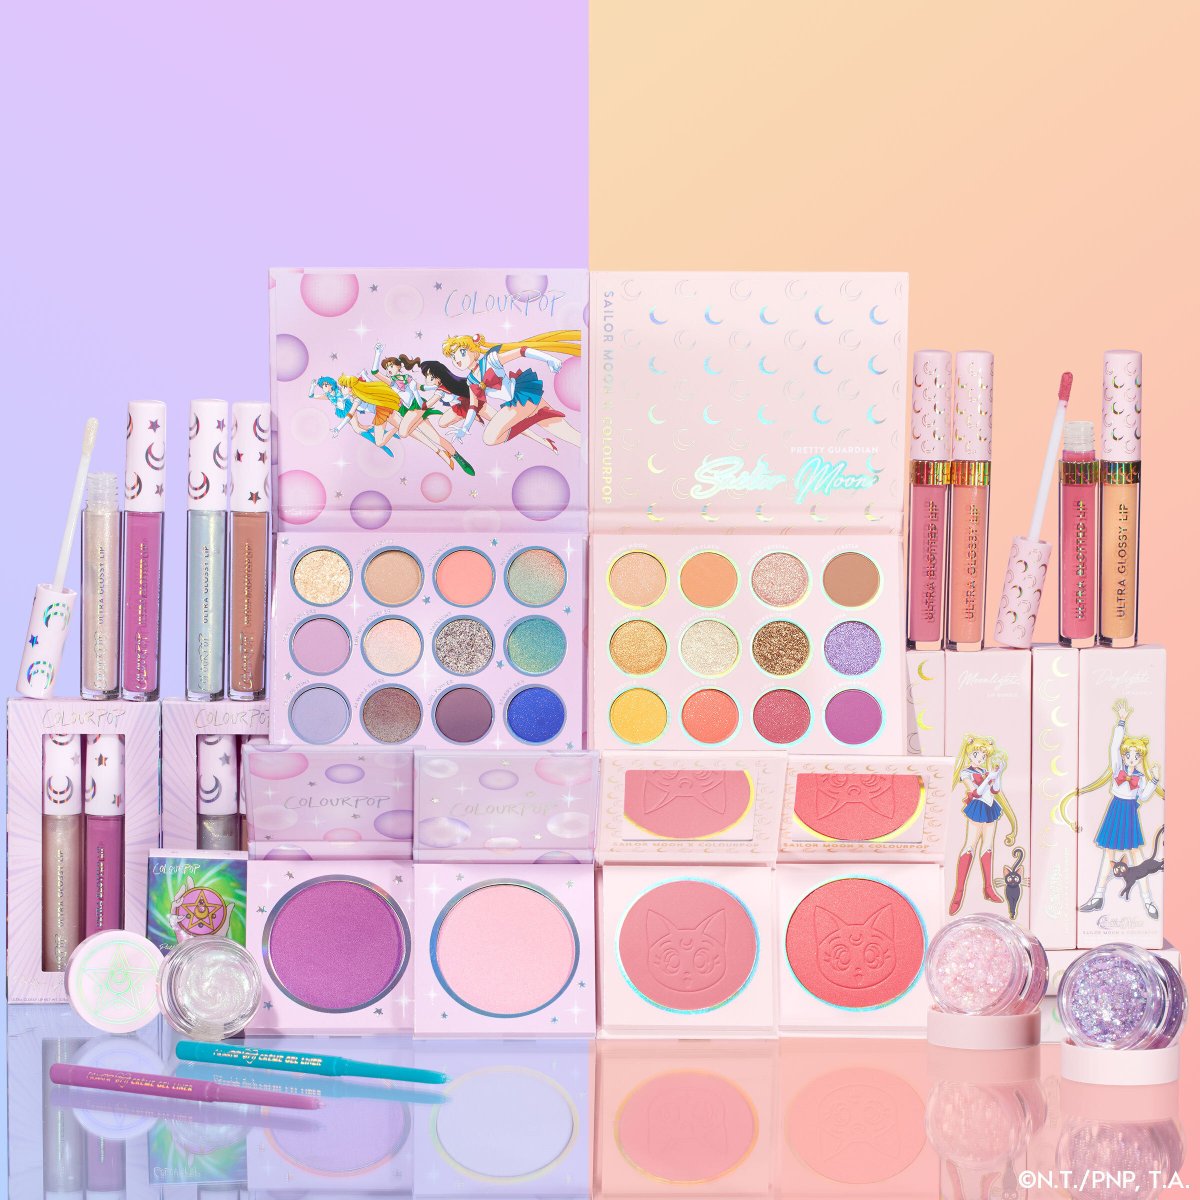 #GIVEAWAY Moon Prism Power Make Up! 🌙💖✨ THREE lucky winners will receive both Sailor Moon x ColourPop and Pretty Guardian Sailor Moon x ColourPop collections!! ☁️🤩

HOW TO ENTER:
1. Like this post
2. Tag a bestie in the comments